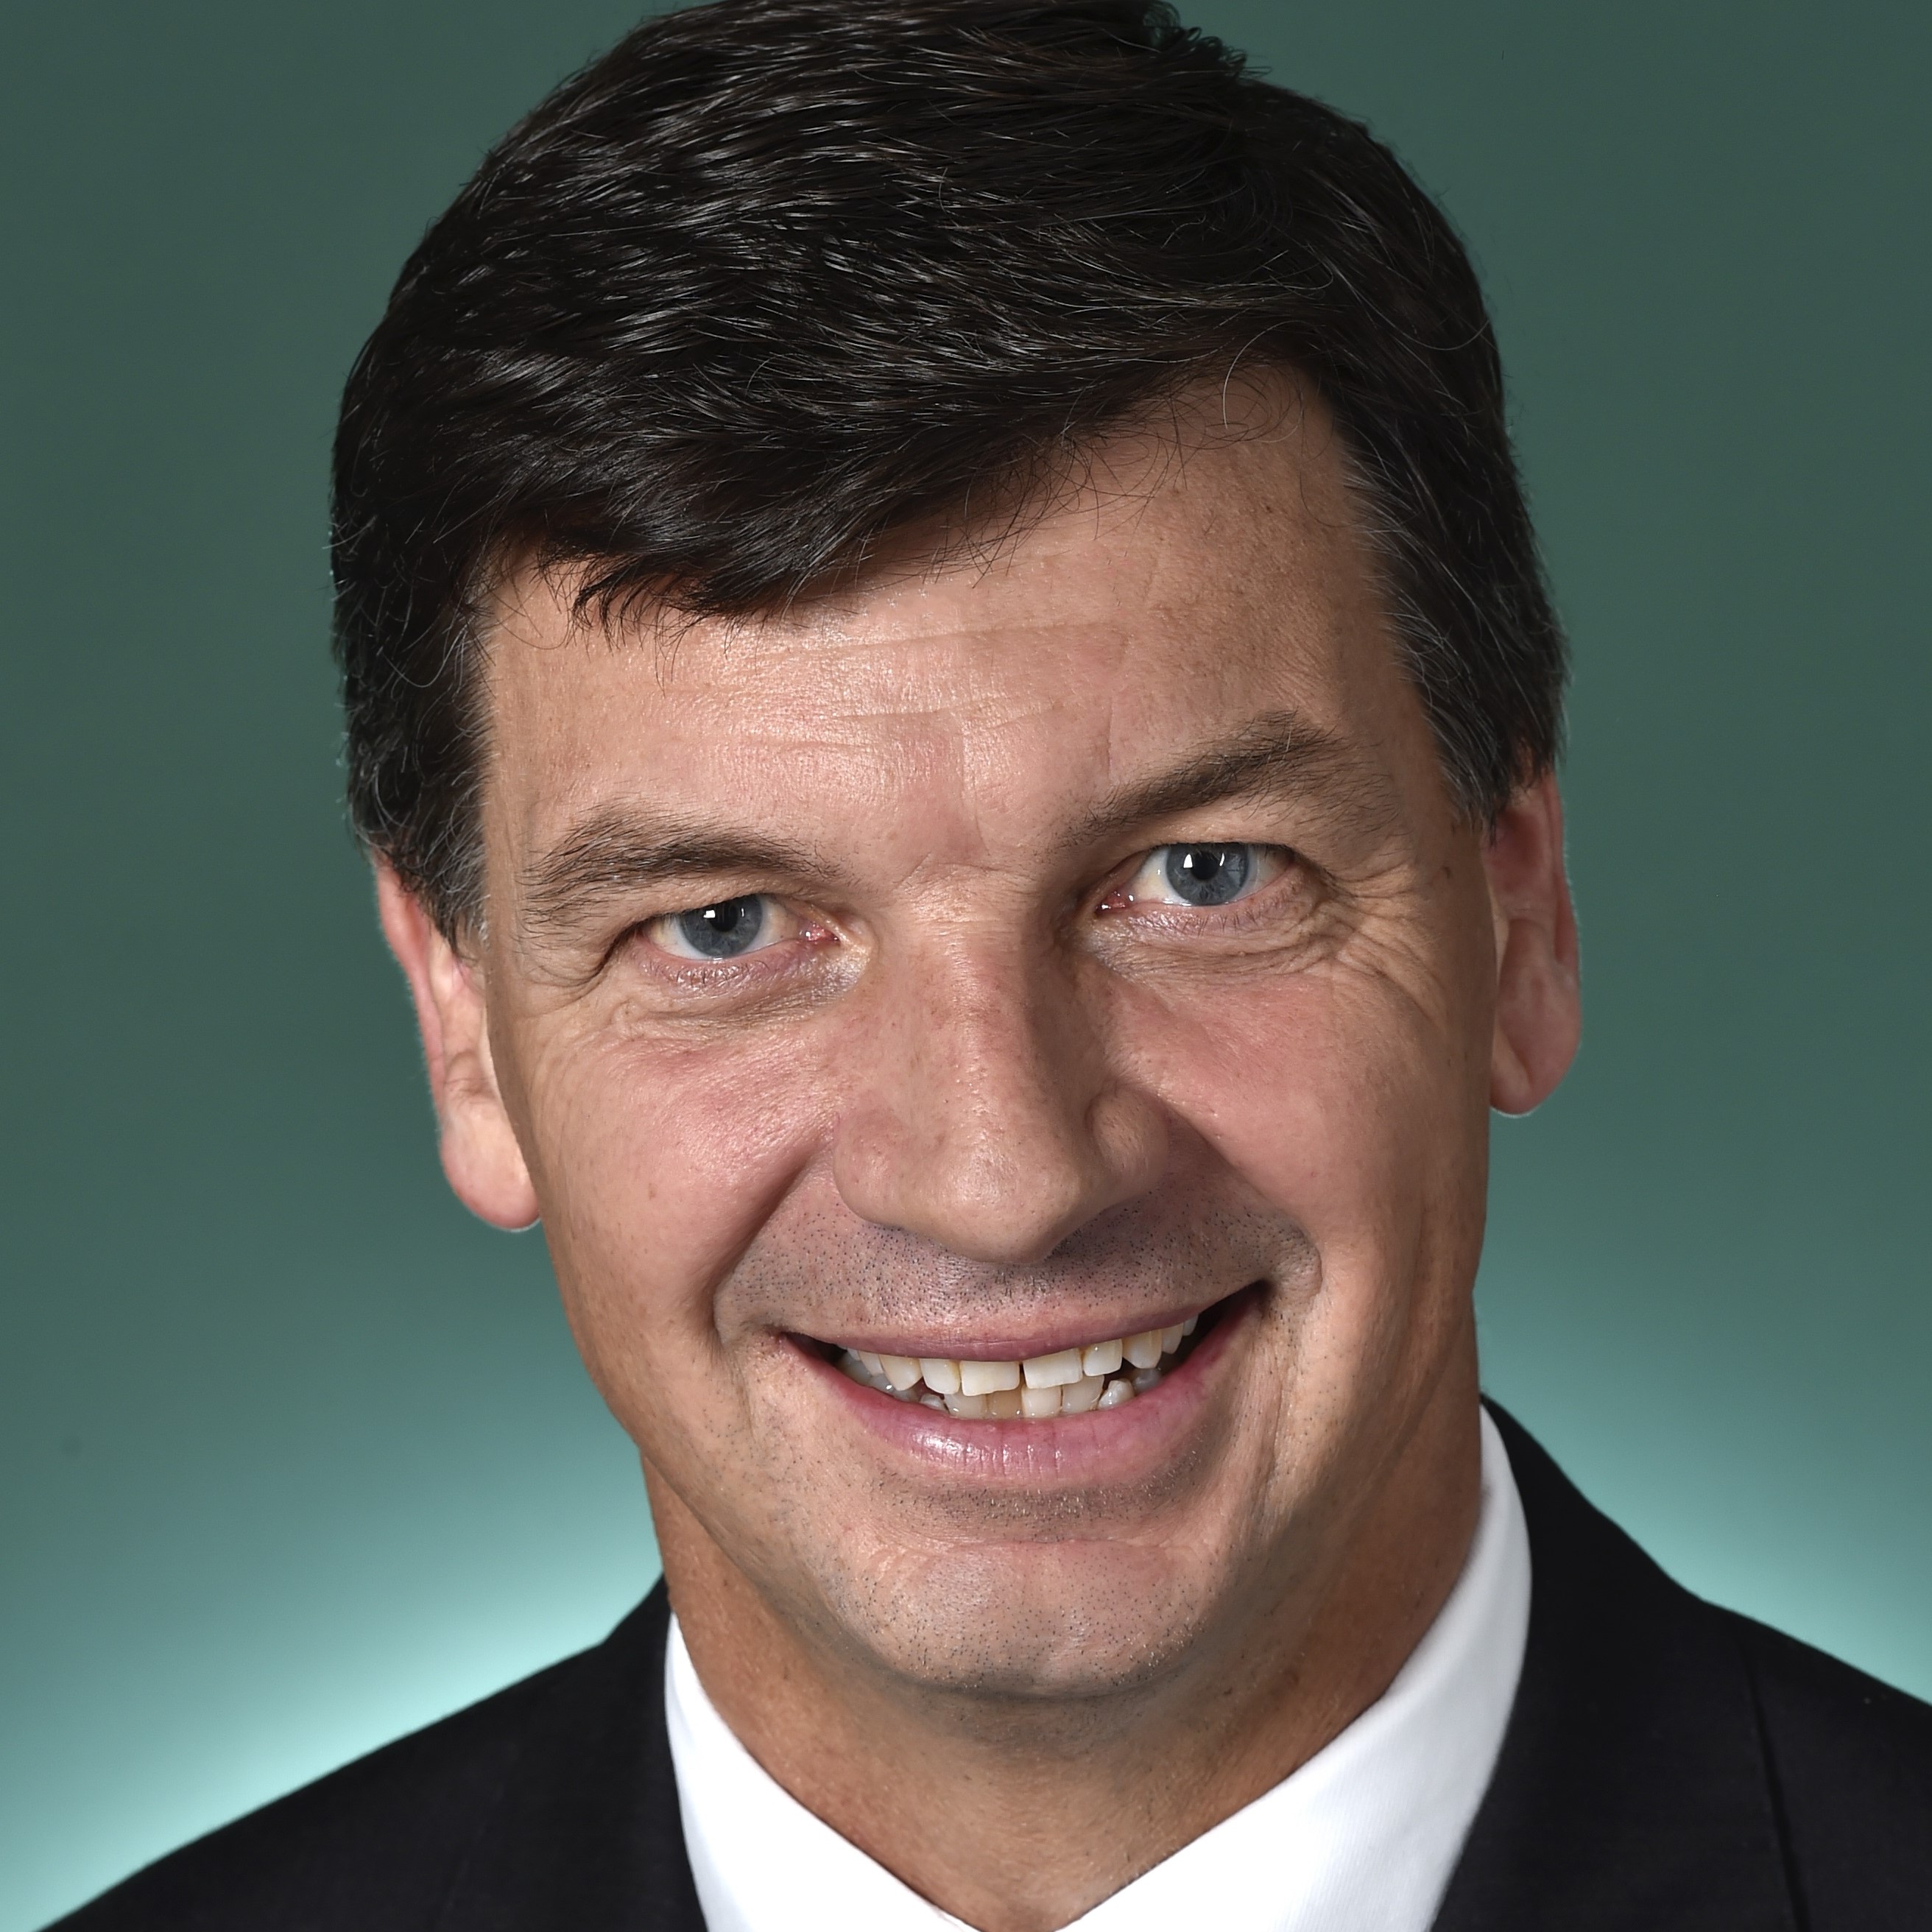 Meet the Minister: The Hon. Angus Taylor MP